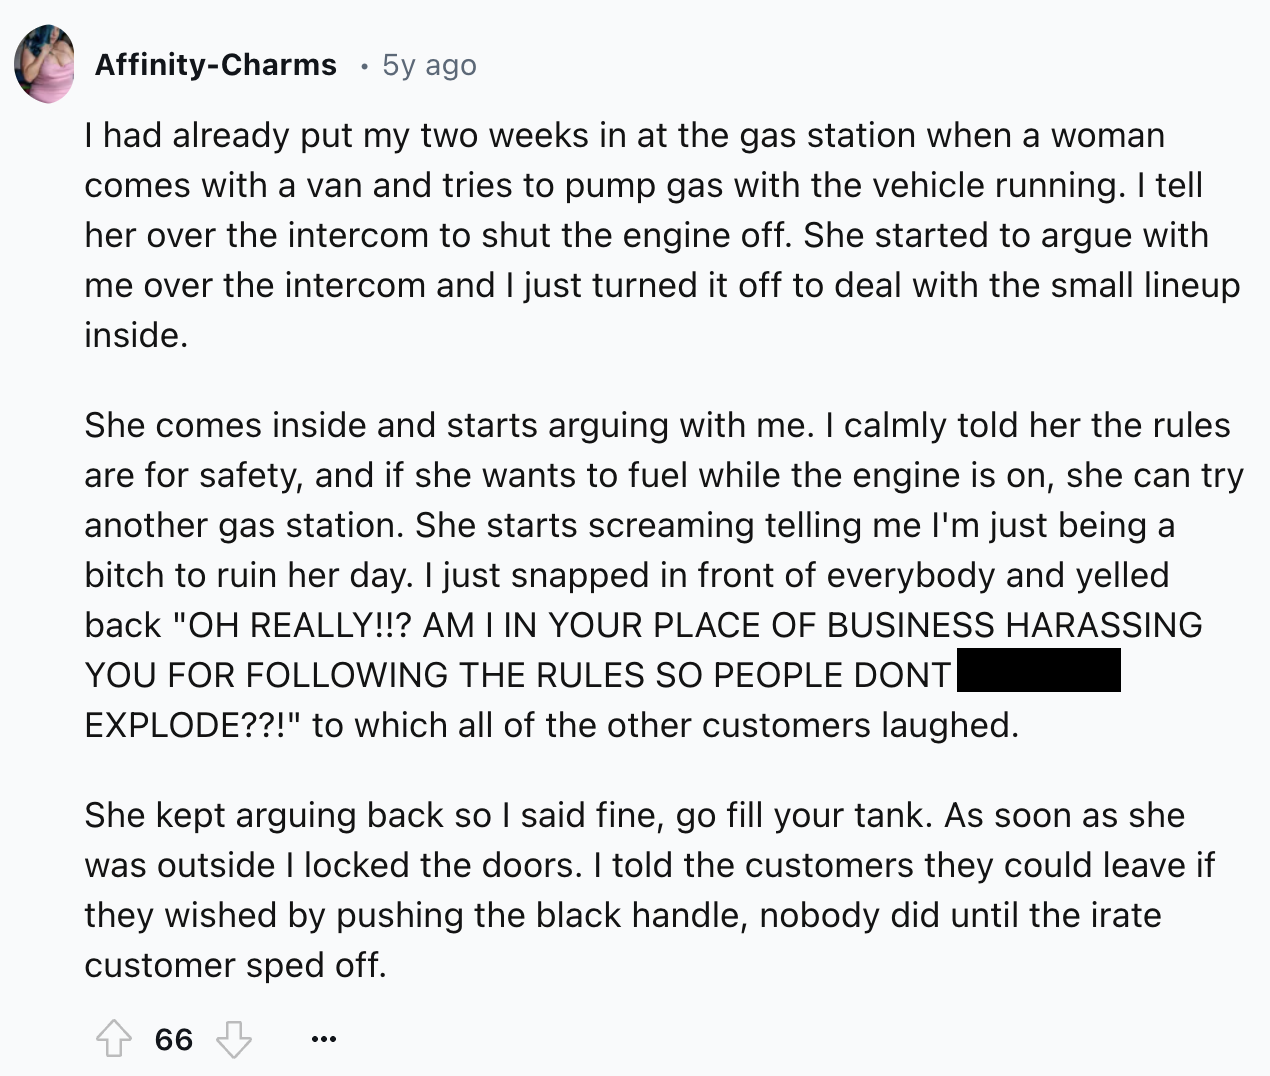 document - AffinityCharms 5y ago I had already put my two weeks in at the gas station when a woman comes with a van and tries to pump gas with the vehicle running. I tell her over the intercom to shut the engine off. She started to argue with me over the 